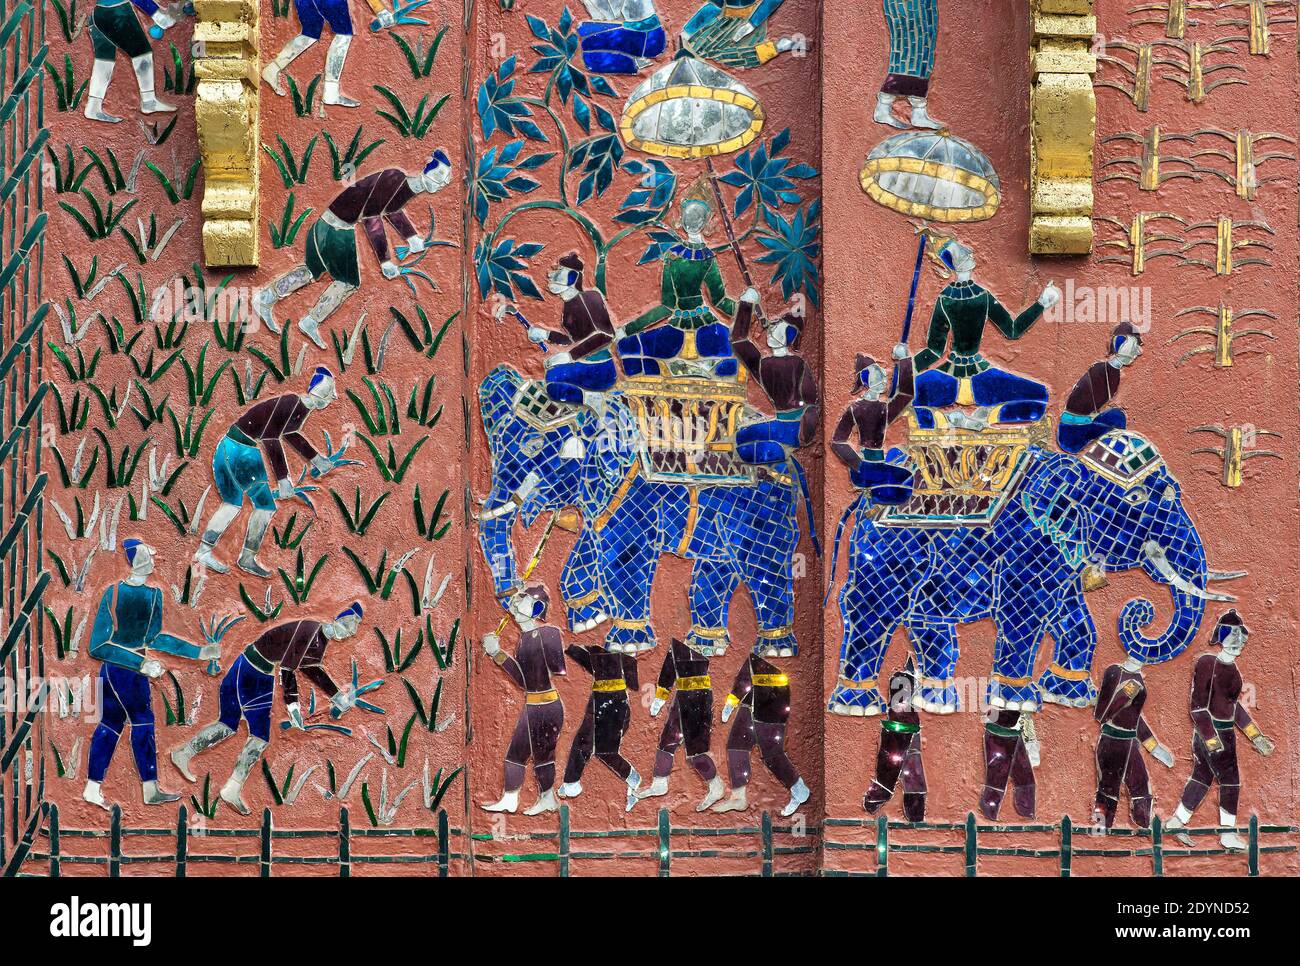 Scenes from rural life as mosaic decorations on an outer wall of the Tripitaka library, Wat Xieng Thong temple, Luang Prabang, Laos Stock Photo